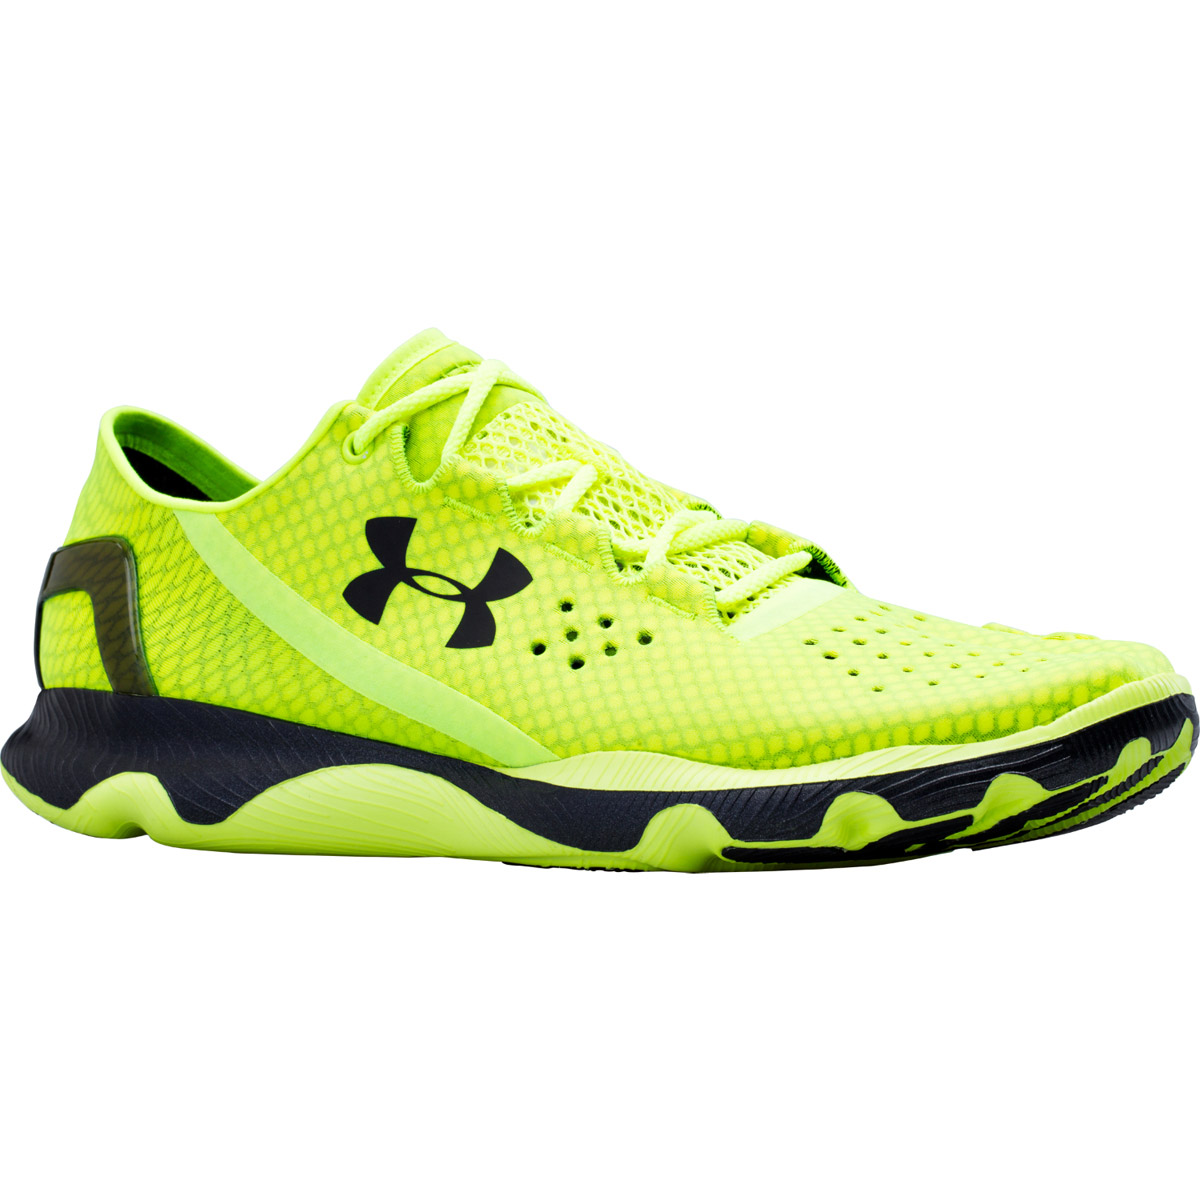 neon yellow under armour shoes